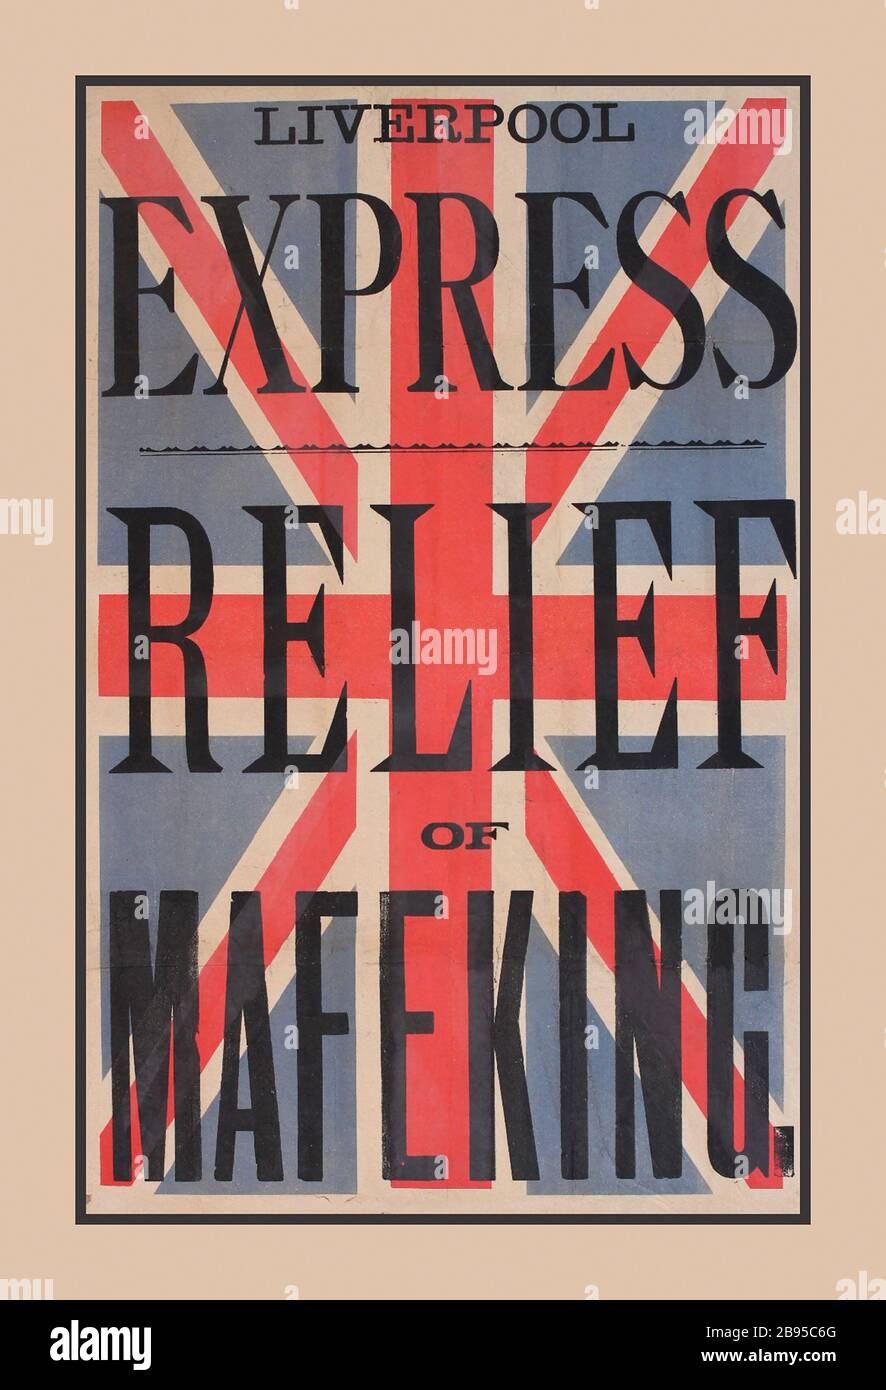 Vintage News Vendor stand Poster 1900 Liverpool Express, Relief of Makeking, News Vendors stand poster for Friday 18th May 1900 Relief of Mafeking, South Africa, during the Second Boer War. The Siege of Mafeking was a 217-day siege battle for the town of Mafeking in South Africa during the Second Boer War from October 1899 to May 1900 British victory, Mafeking relieved Stock Photo